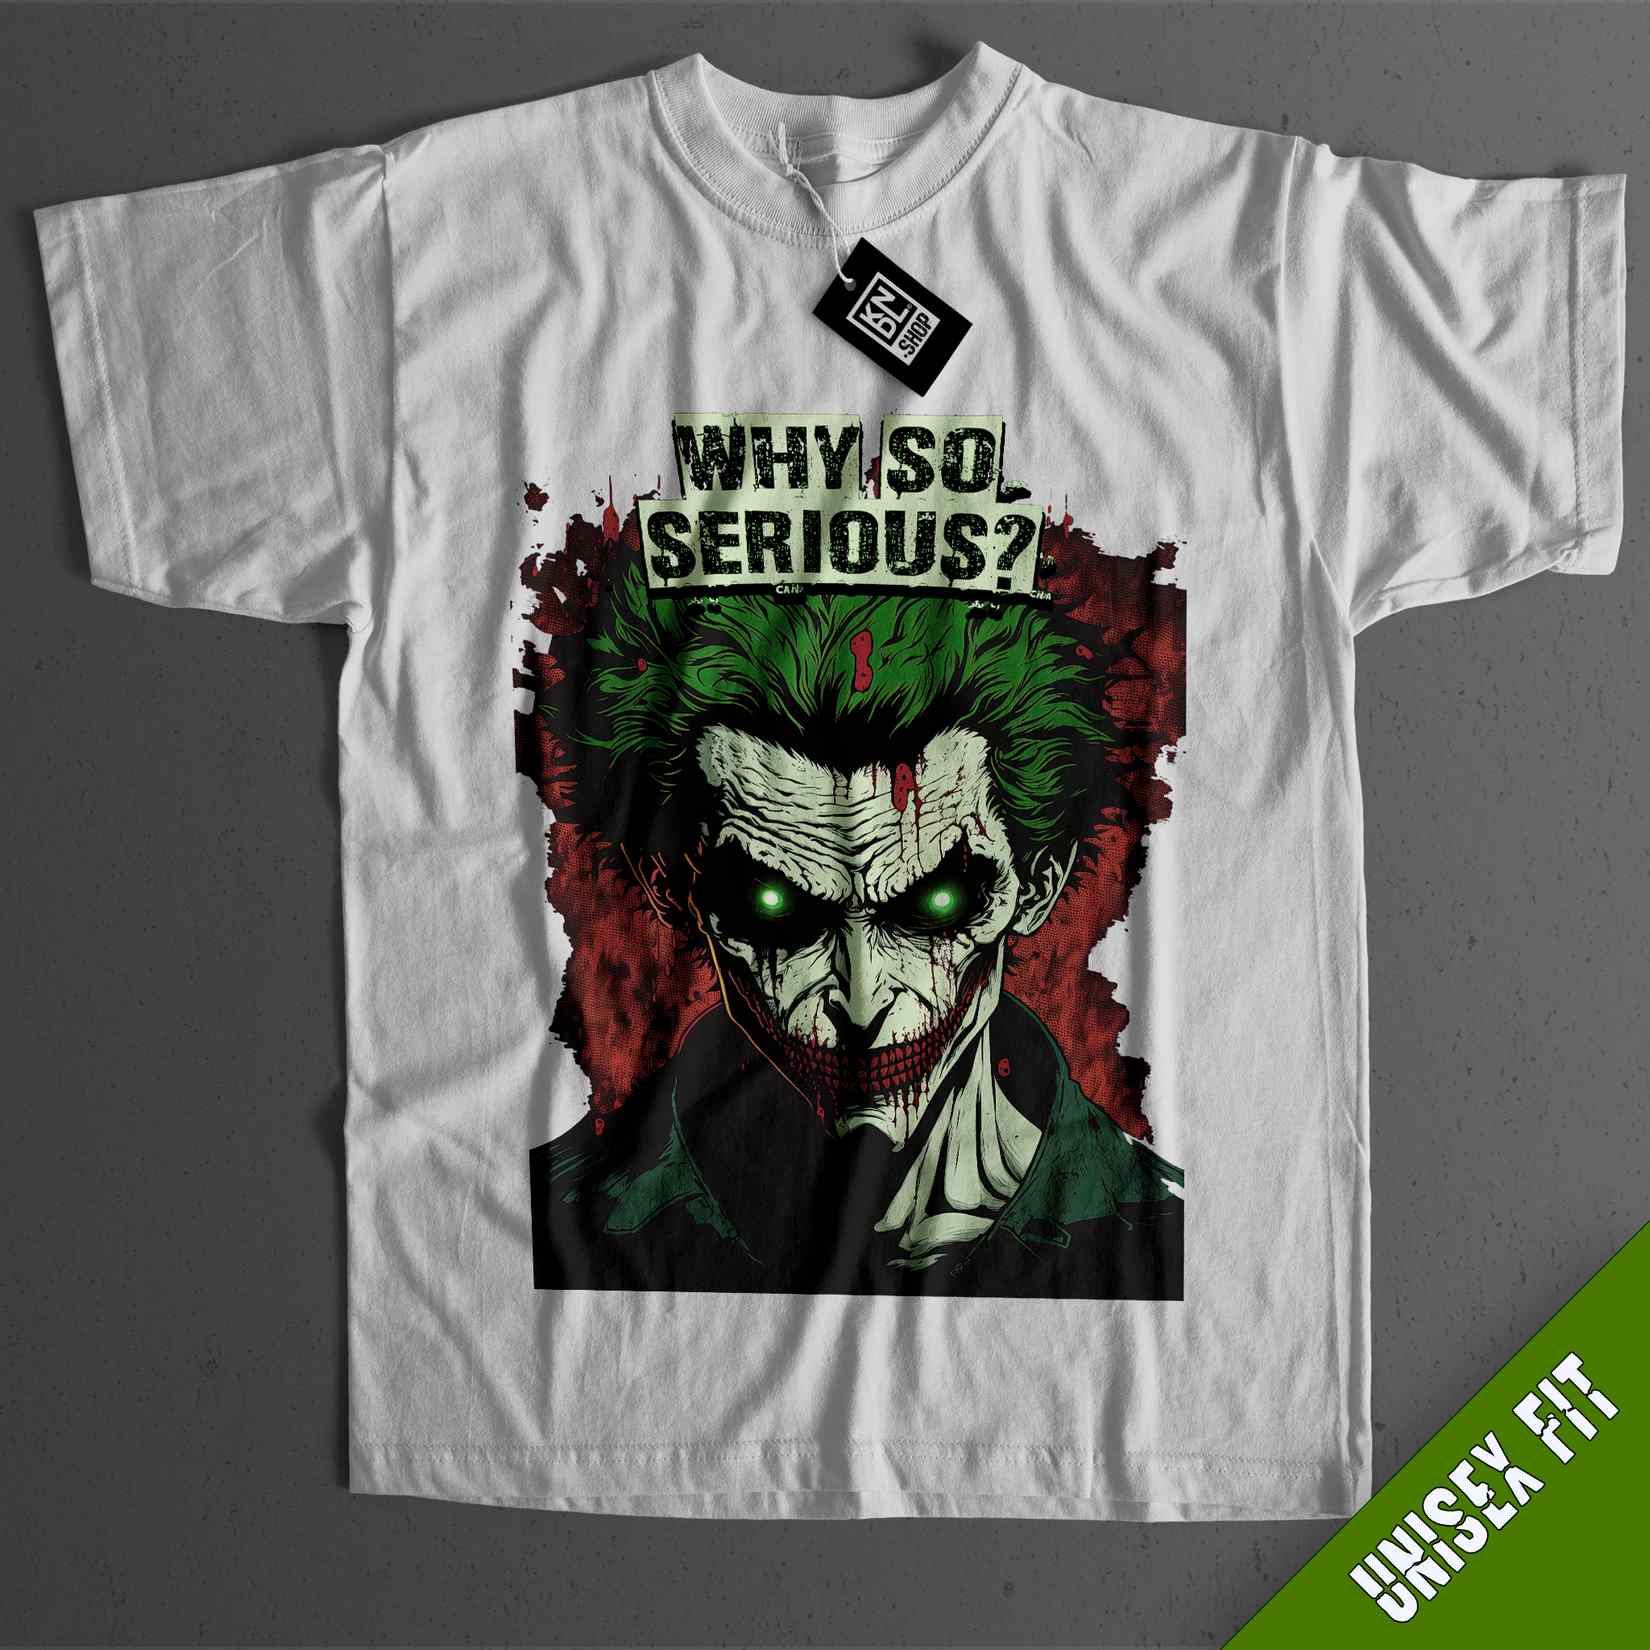 a white t - shirt with an image of the joker